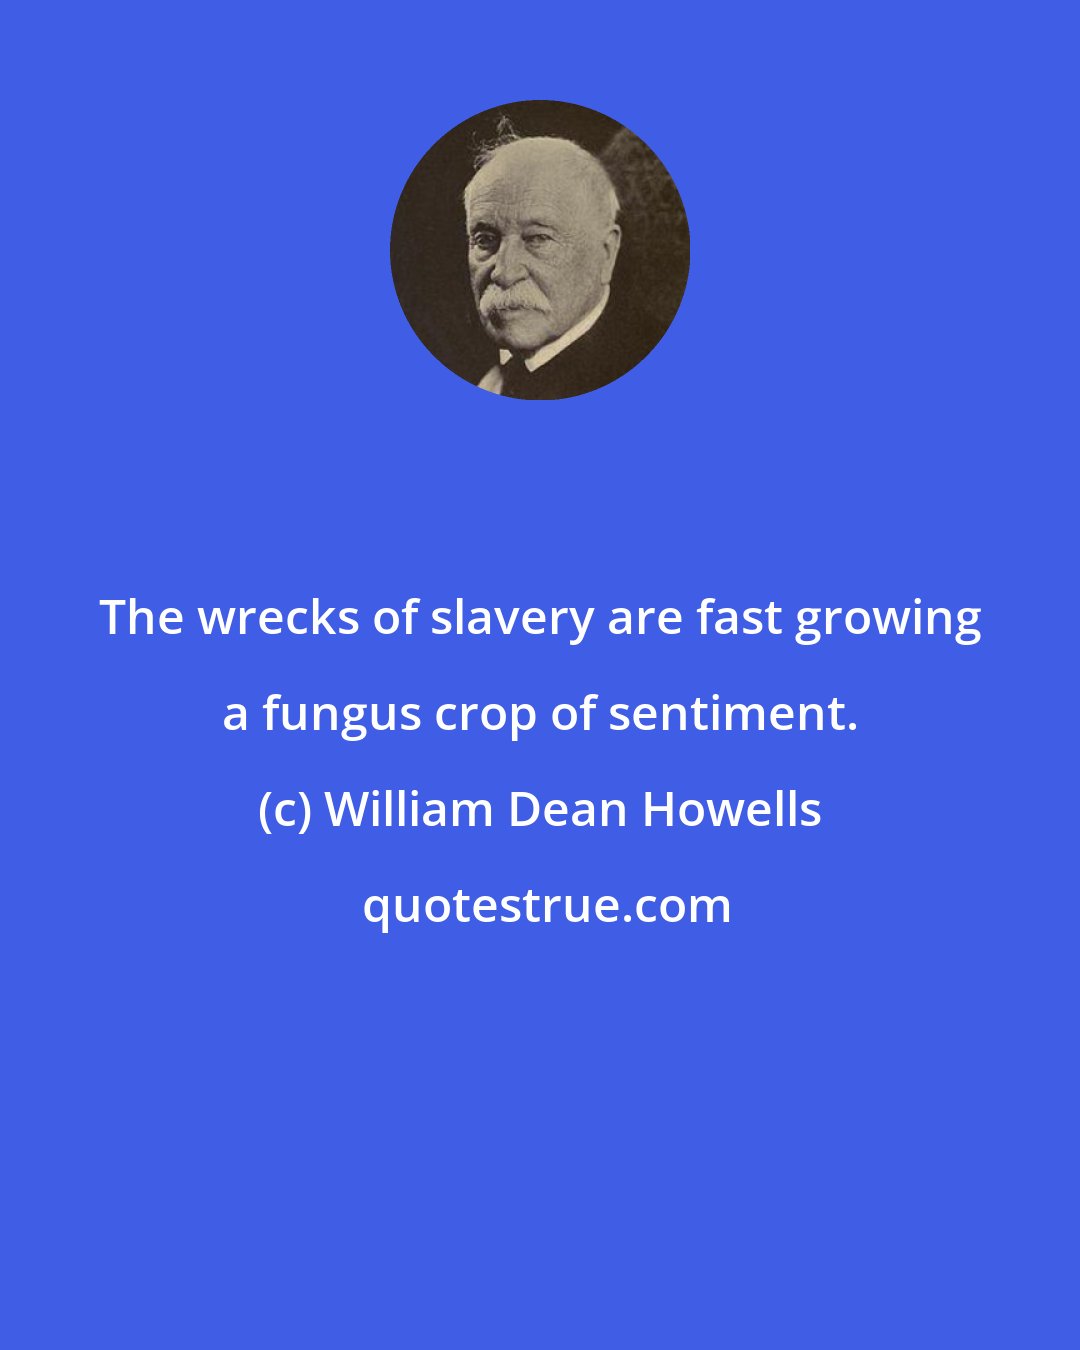 William Dean Howells: The wrecks of slavery are fast growing a fungus crop of sentiment.